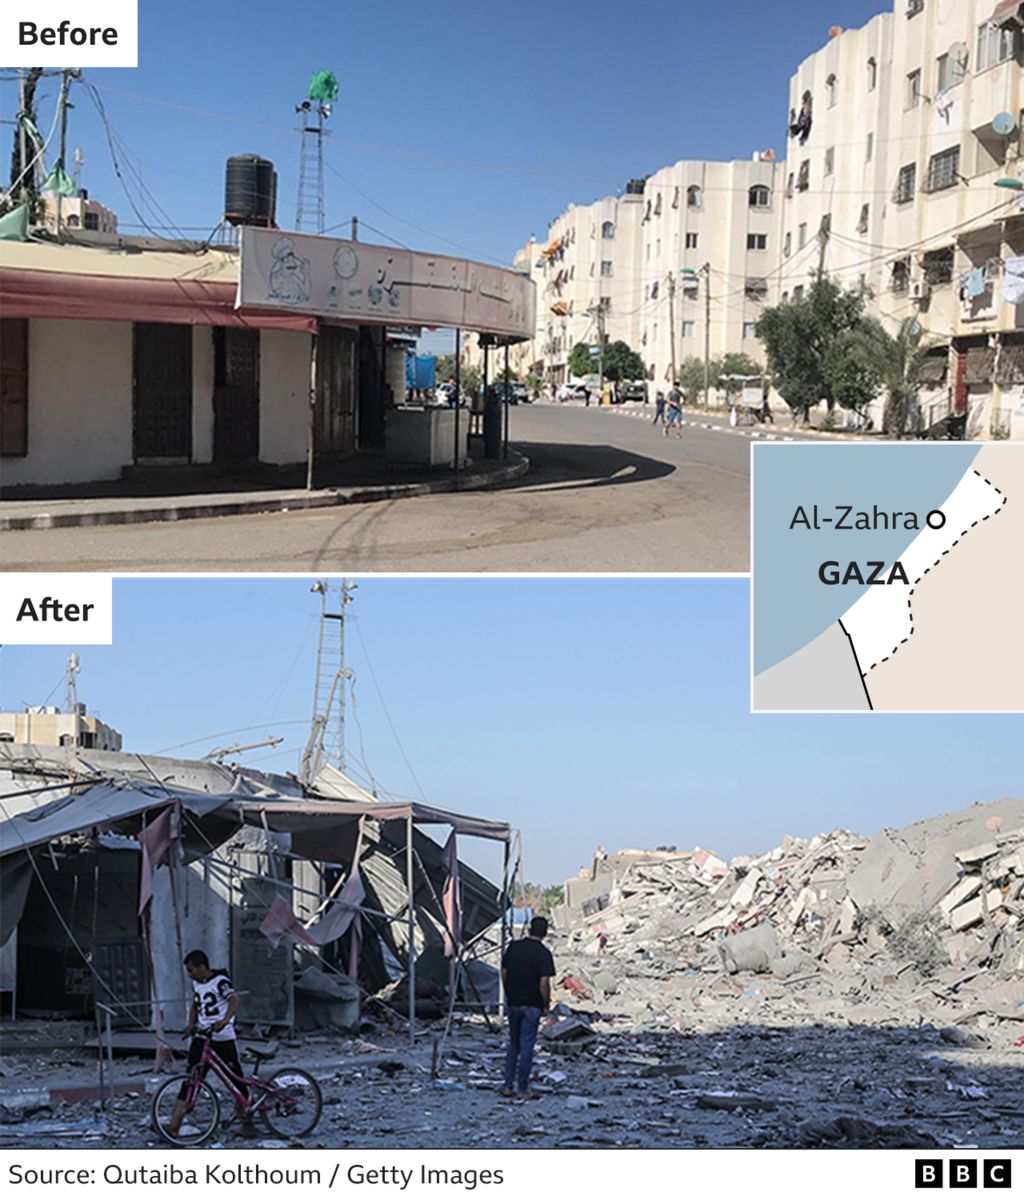 Two images showing the shops on Al-Zahra Street next to the park before and after the strikes were carried out on the main row of tower blocks in the neighbourhood